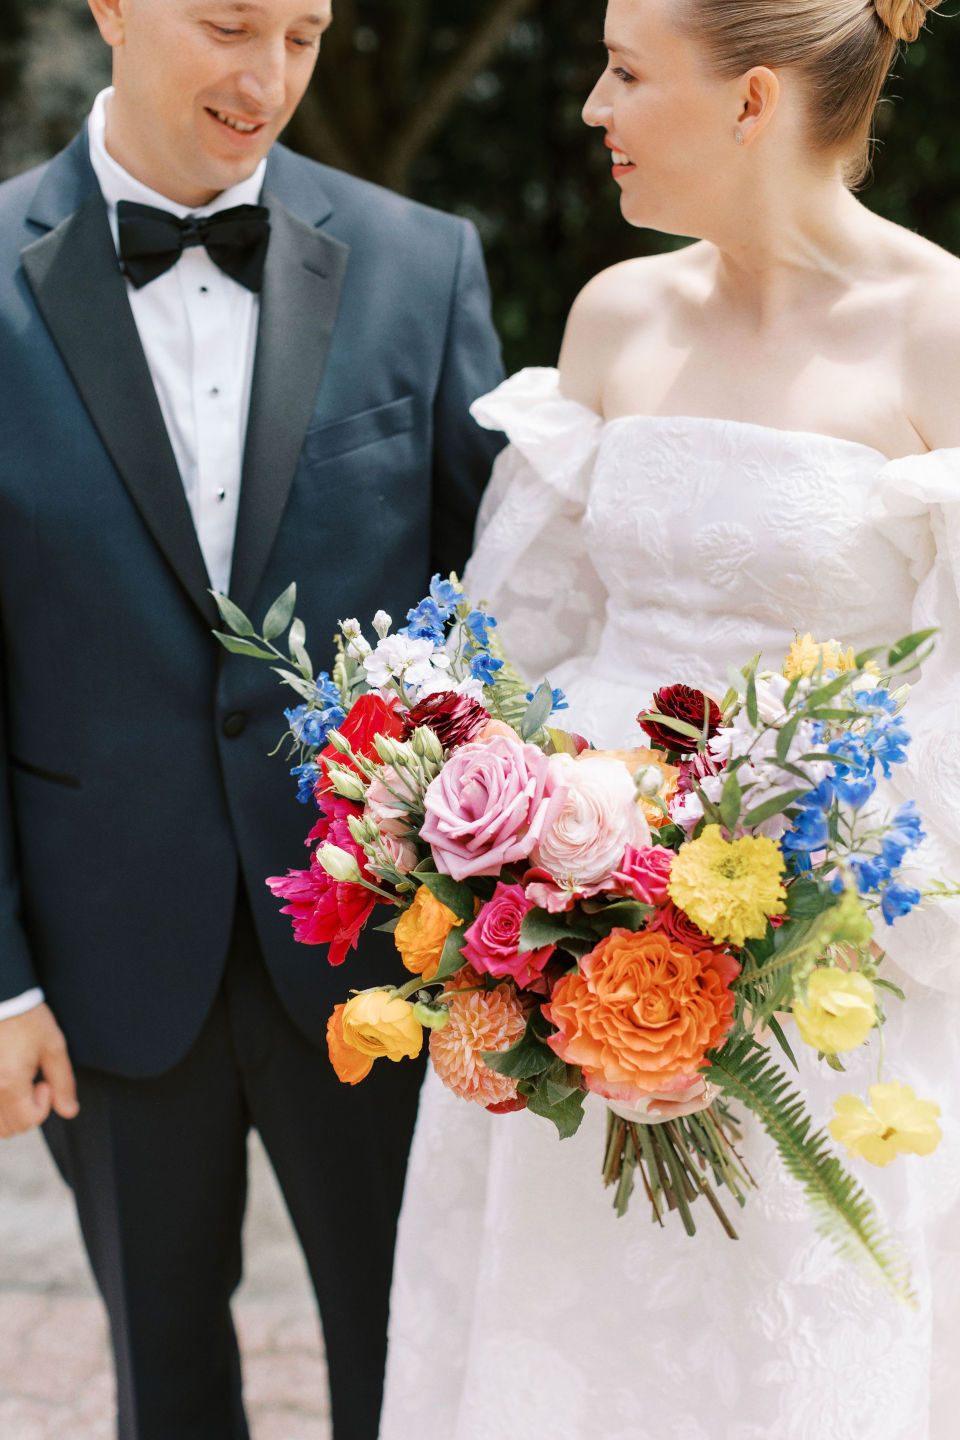 Colourful Summer Wedding | Fairmont Le Chateau Montebello | Erica Irwin Weddings and Events | Scott H Wilson Photography